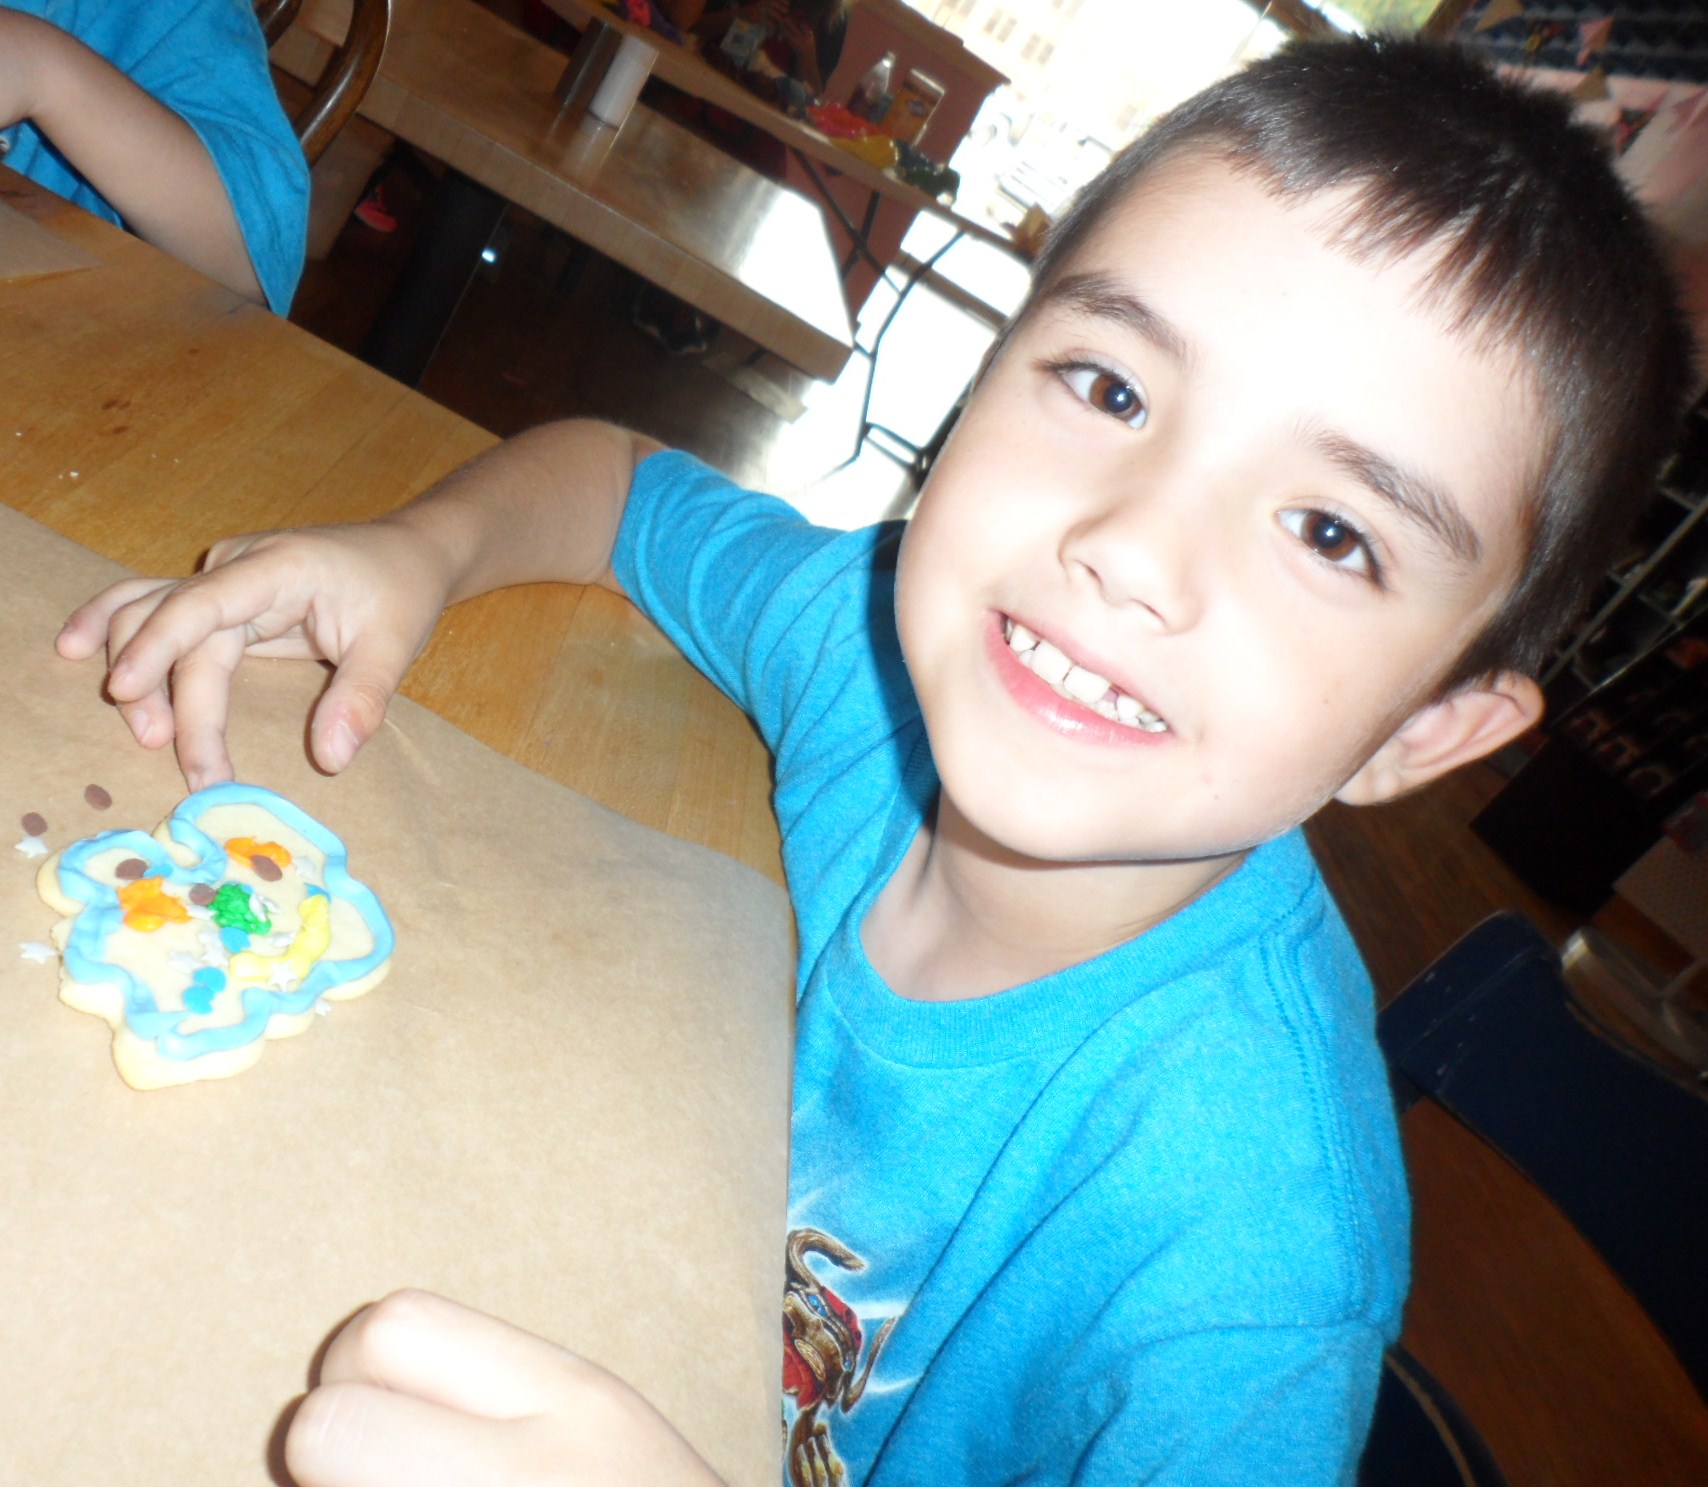 Connor's completed cookie! The 2nd one.